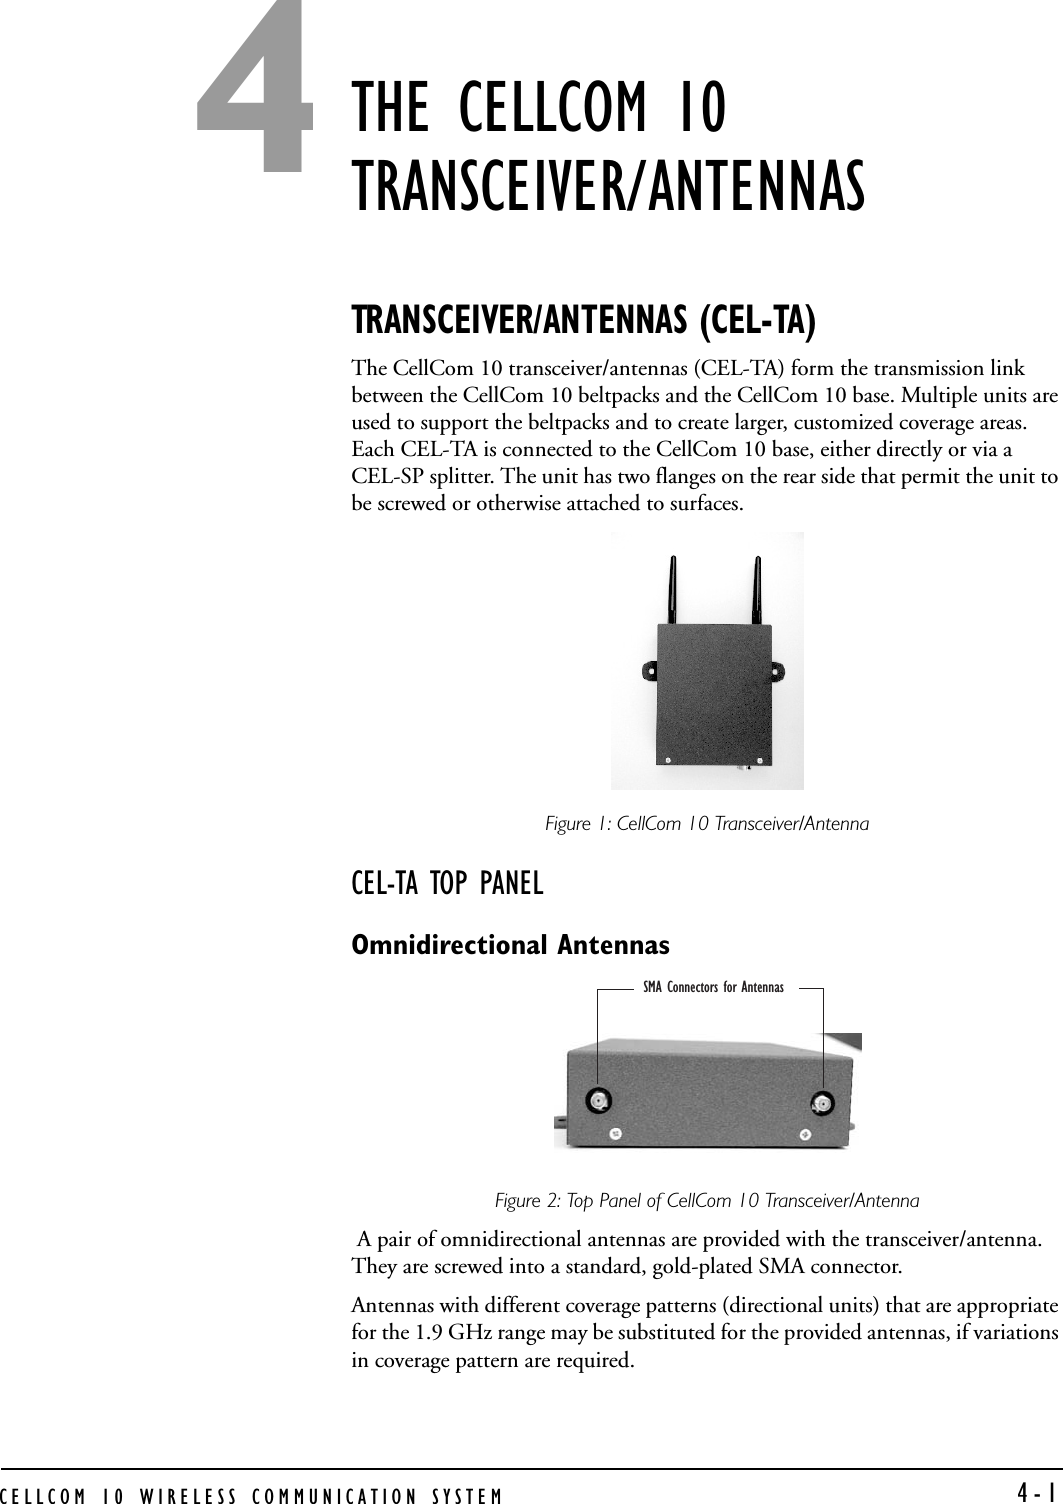 CELLCOM 10 WIRELESS COMMUNICATION SYSTEM  4-1THE CELLCOM 10 TRANSCEIVER/ANTENNASTRANSCEIVER/ANTENNAS (CEL-TA)The CellCom 10 transceiver/antennas (CEL-TA) form the transmission link between the CellCom 10 beltpacks and the CellCom 10 base. Multiple units are used to support the beltpacks and to create larger, customized coverage areas. Each CEL-TA is connected to the CellCom 10 base, either directly or via a CEL-SP splitter. The unit has two flanges on the rear side that permit the unit to be screwed or otherwise attached to surfaces.Figure 1: CellCom 10 Transceiver/AntennaCEL-TA TOP PANELOmnidirectional AntennasFigure 2: Top Panel of CellCom 10 Transceiver/Antenna A pair of omnidirectional antennas are provided with the transceiver/antenna. They are screwed into a standard, gold-plated SMA connector. Antennas with different coverage patterns (directional units) that are appropriate for the 1.9 GHz range may be substituted for the provided antennas, if variations in coverage pattern are required.SMA Connectors for Antennas 4